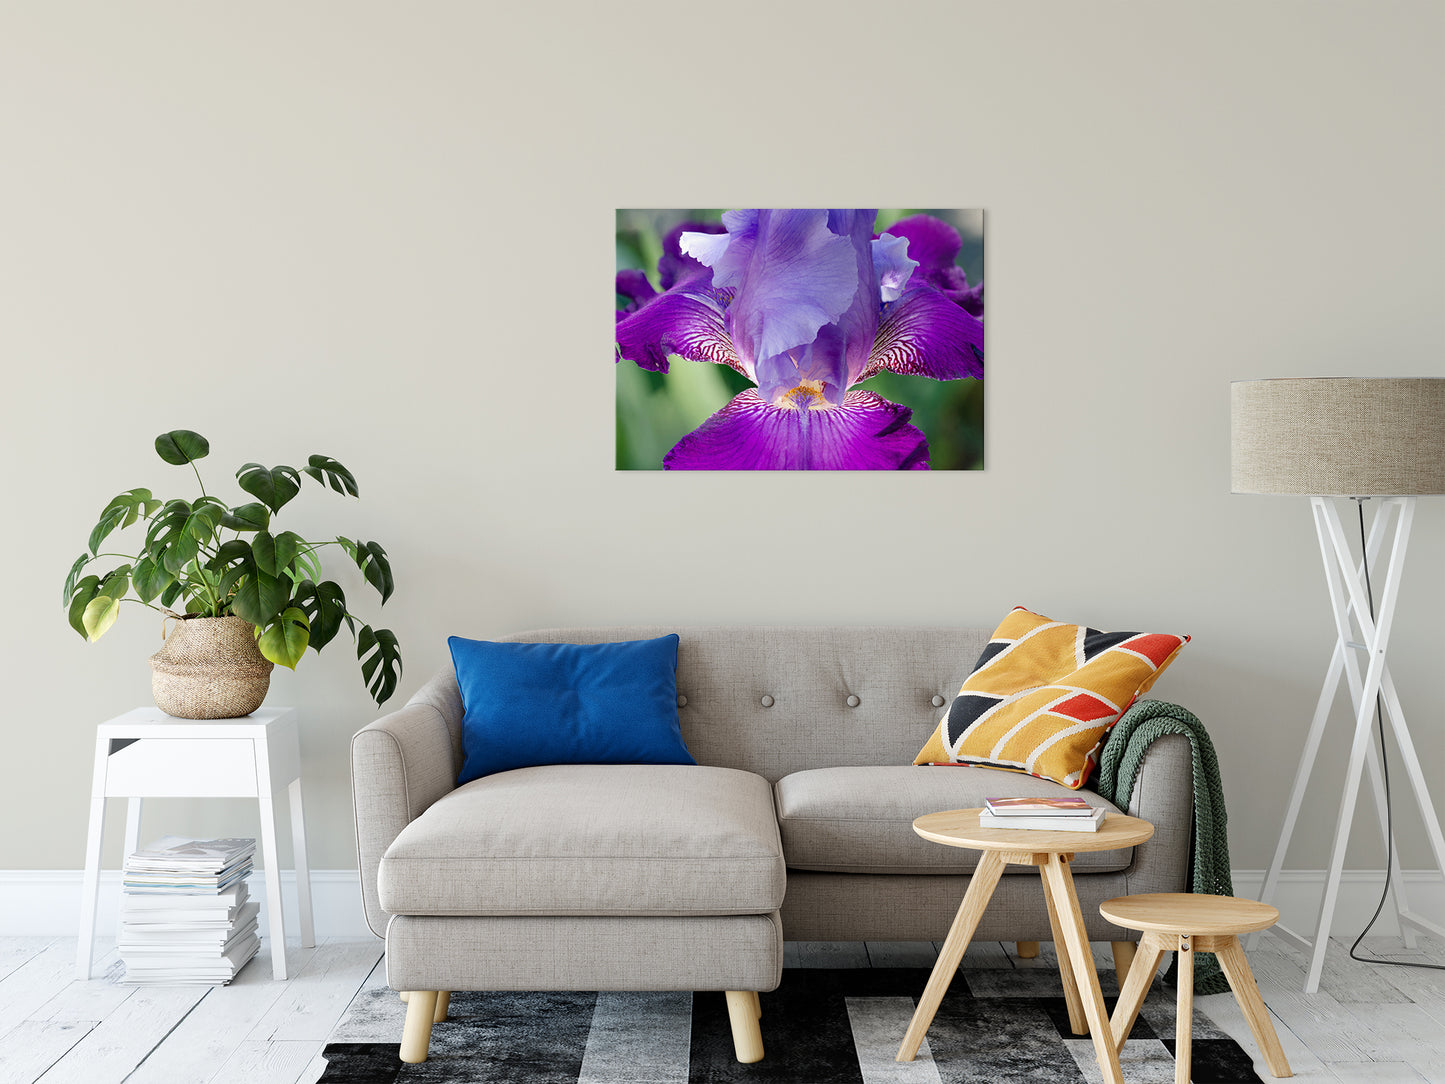 Large Wall Prints For Bedroom: Glowing Iris Nature / Floral Photo Fine Art Canvas Wall Art Prints 24" x 36" - PIPAFINEART